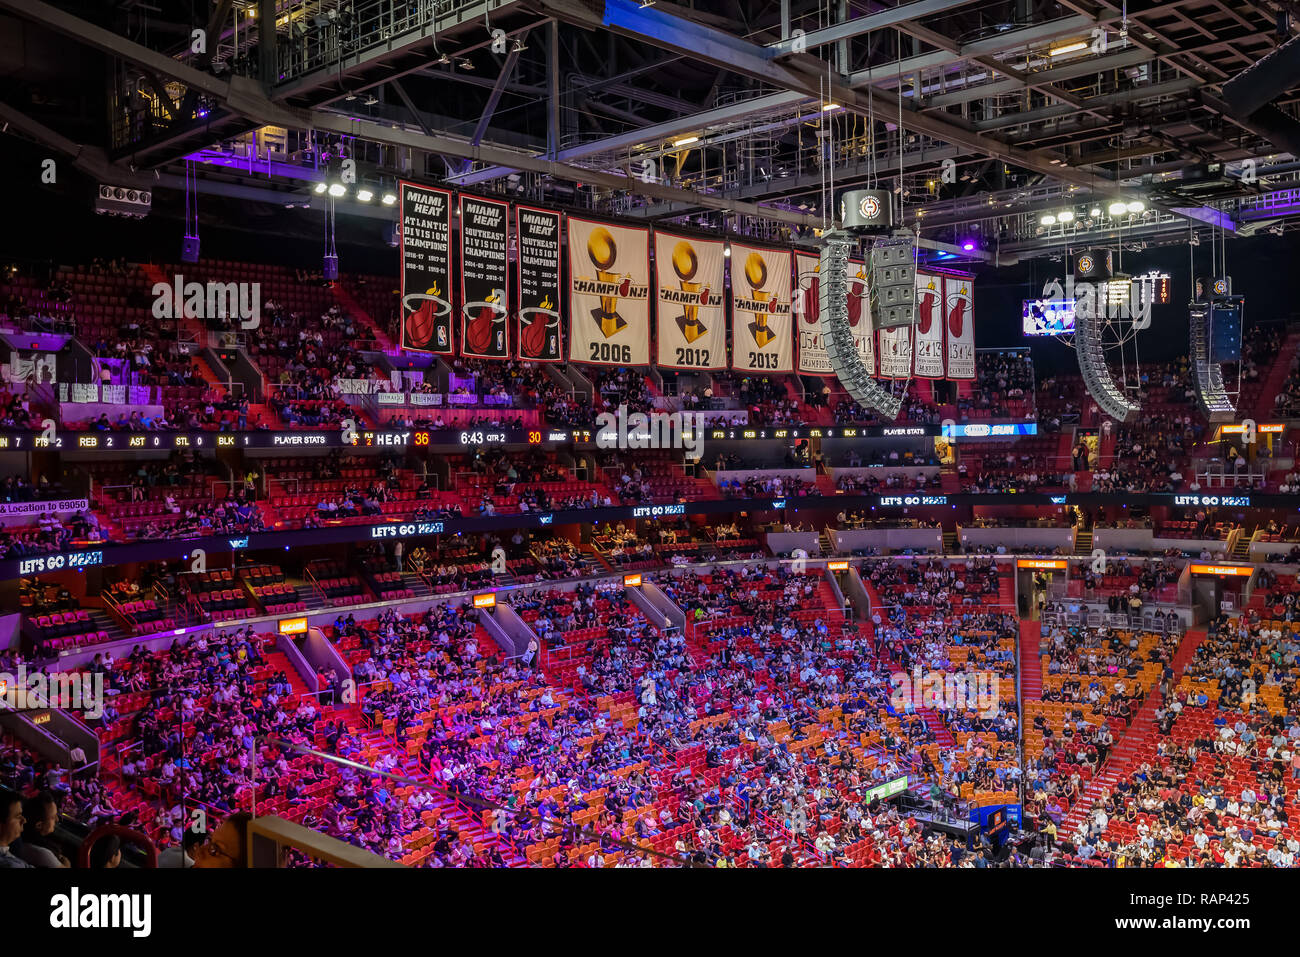 Miami, Florida - December 2018. Crowds of supporters fill the American Airlines Arena during an NBA match between Miami Heat and Orlando Magic. Stock Photo